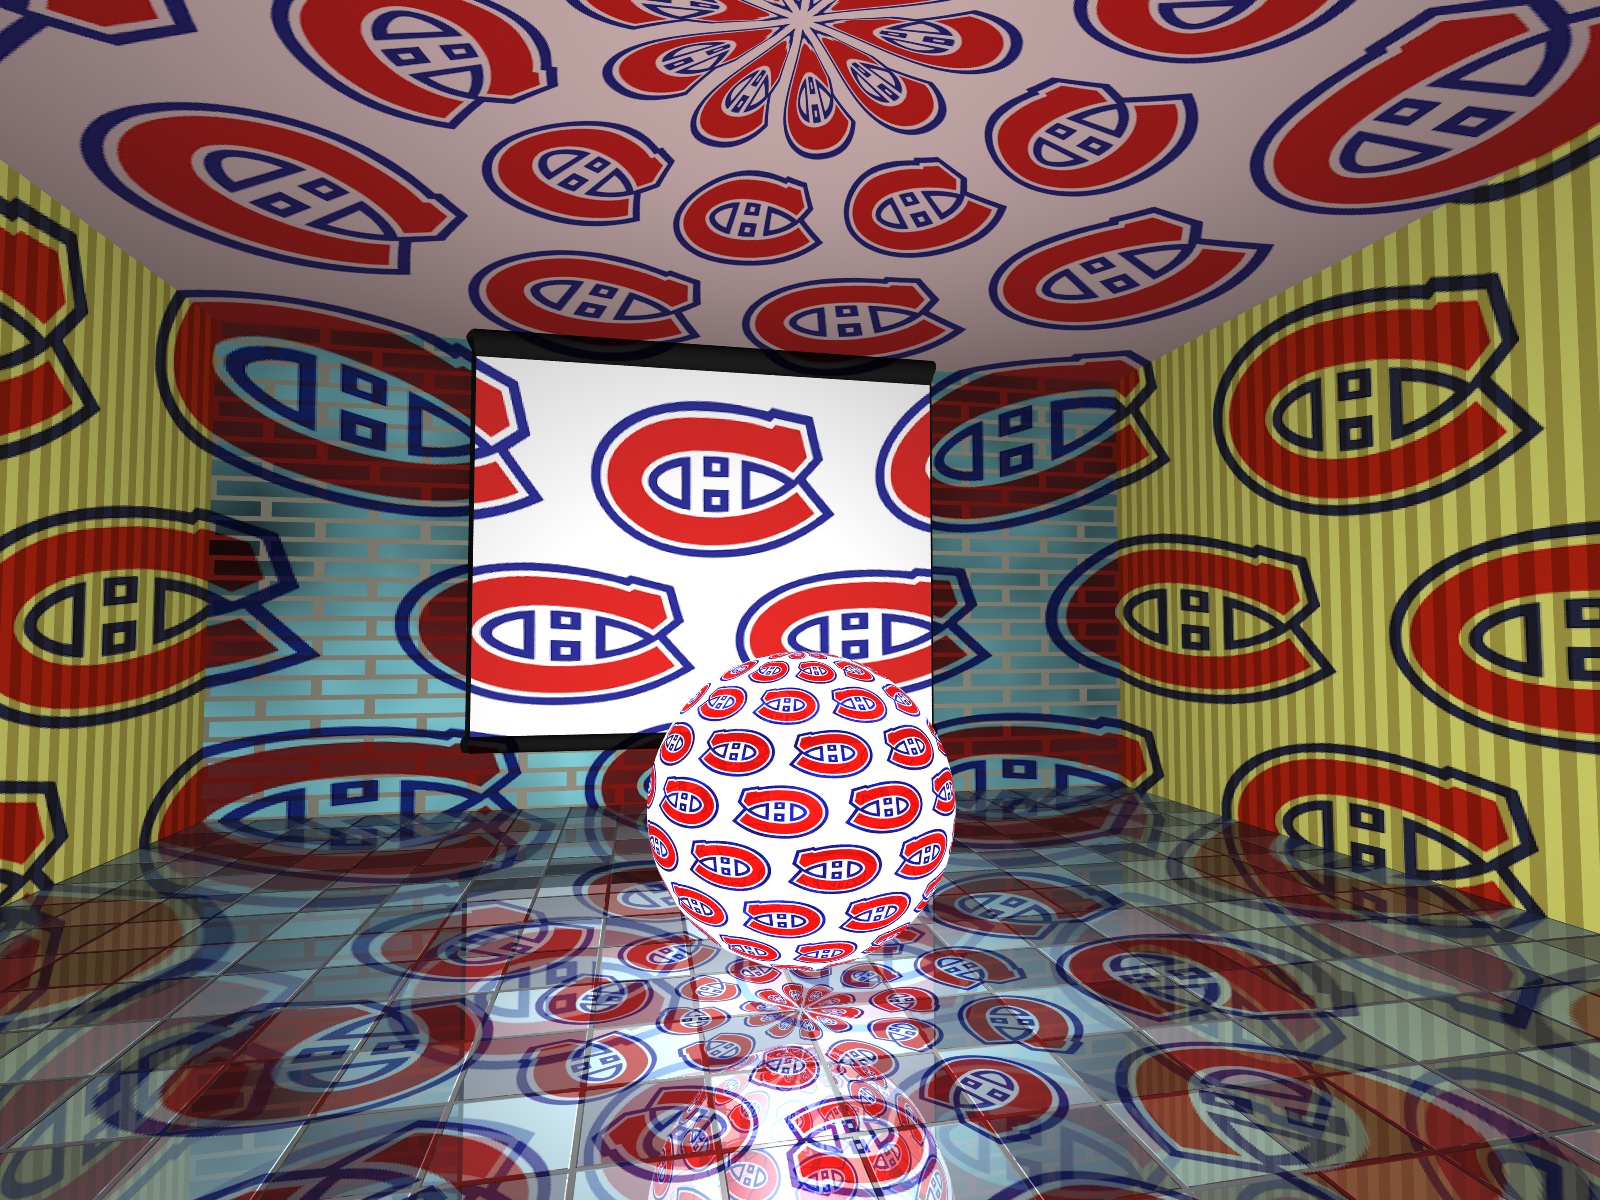 Awesome Montreal Canadiens wallpaper Montreal Canadiens wallpapers 1600x1200